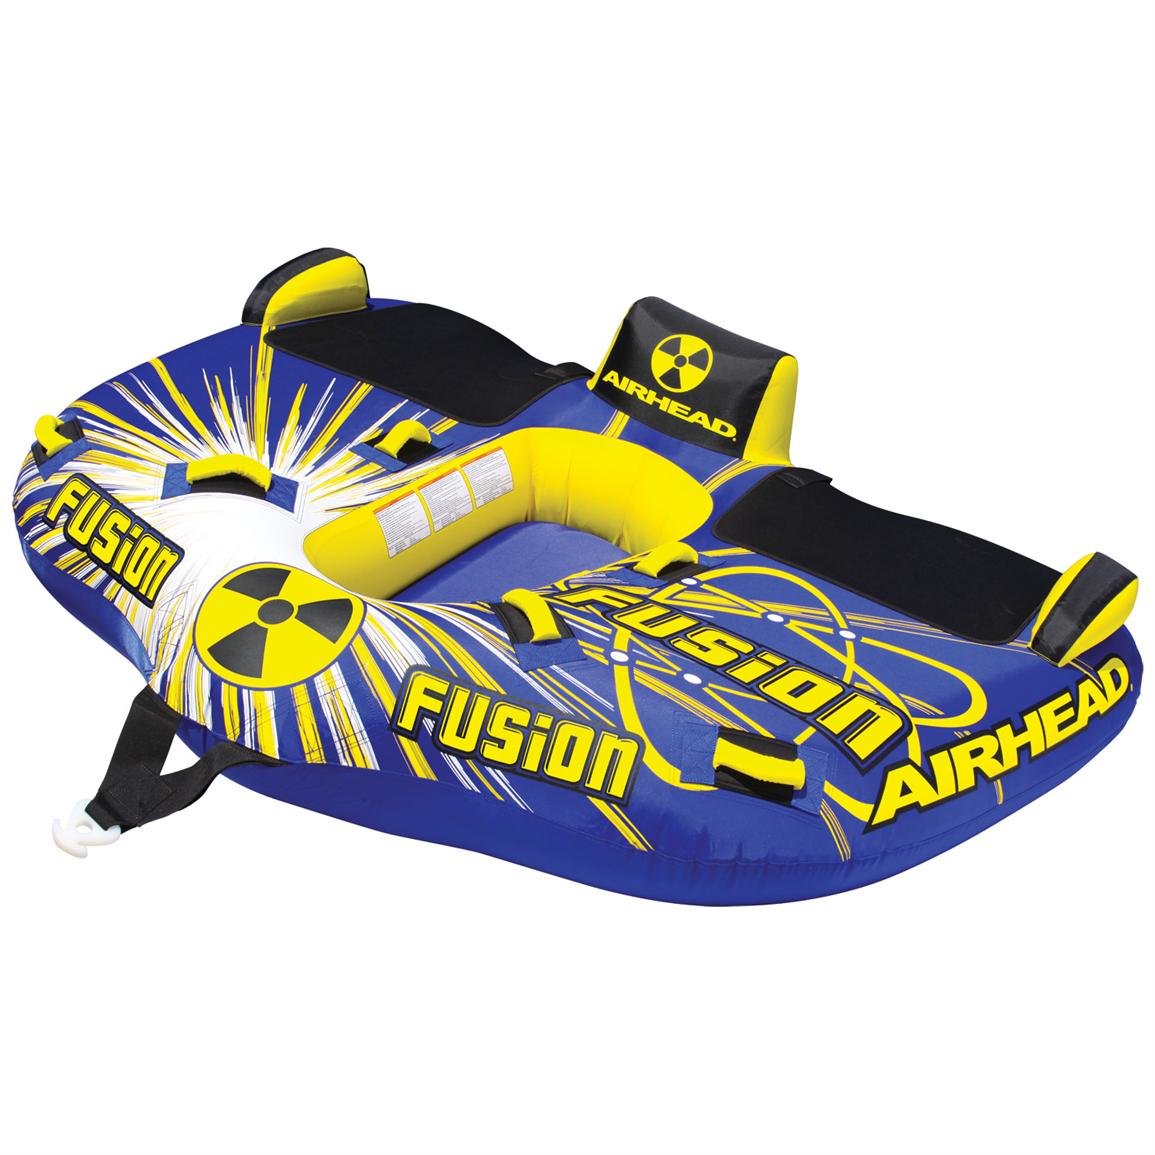 Airhead® Fusion 3rider Towable Tube 296408, Tubes & Towables at